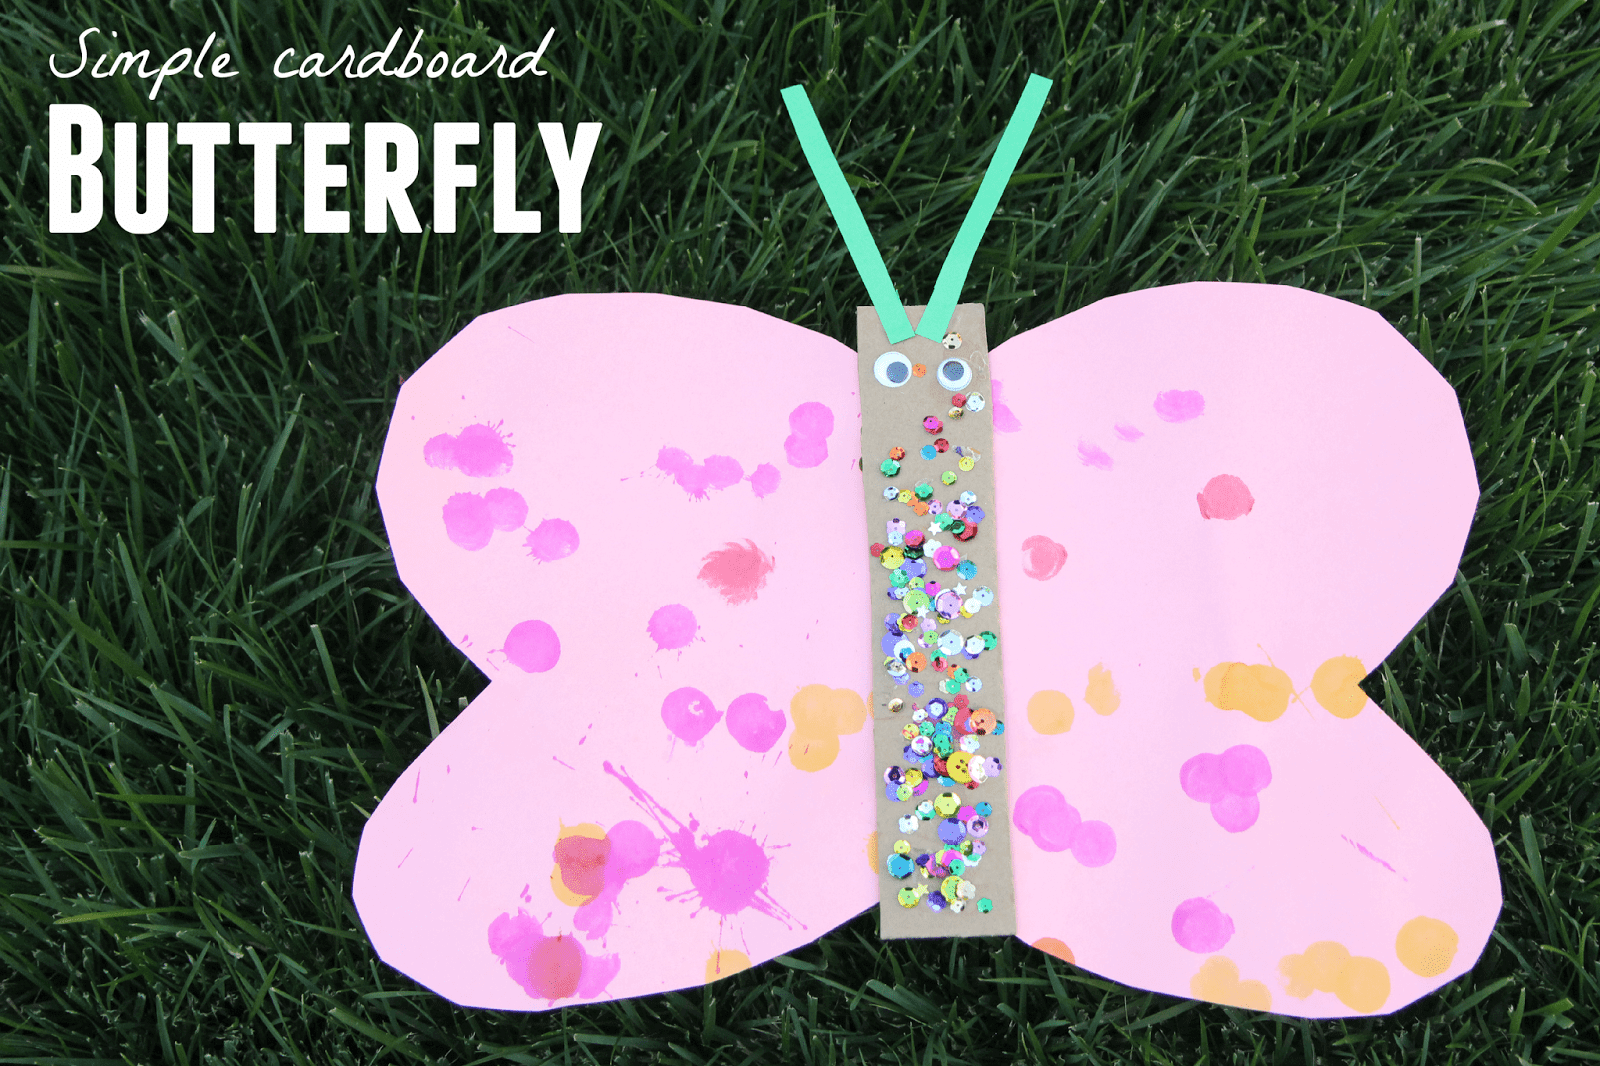 Simple Butterfly Paper Craft Using Cardboard For Kids